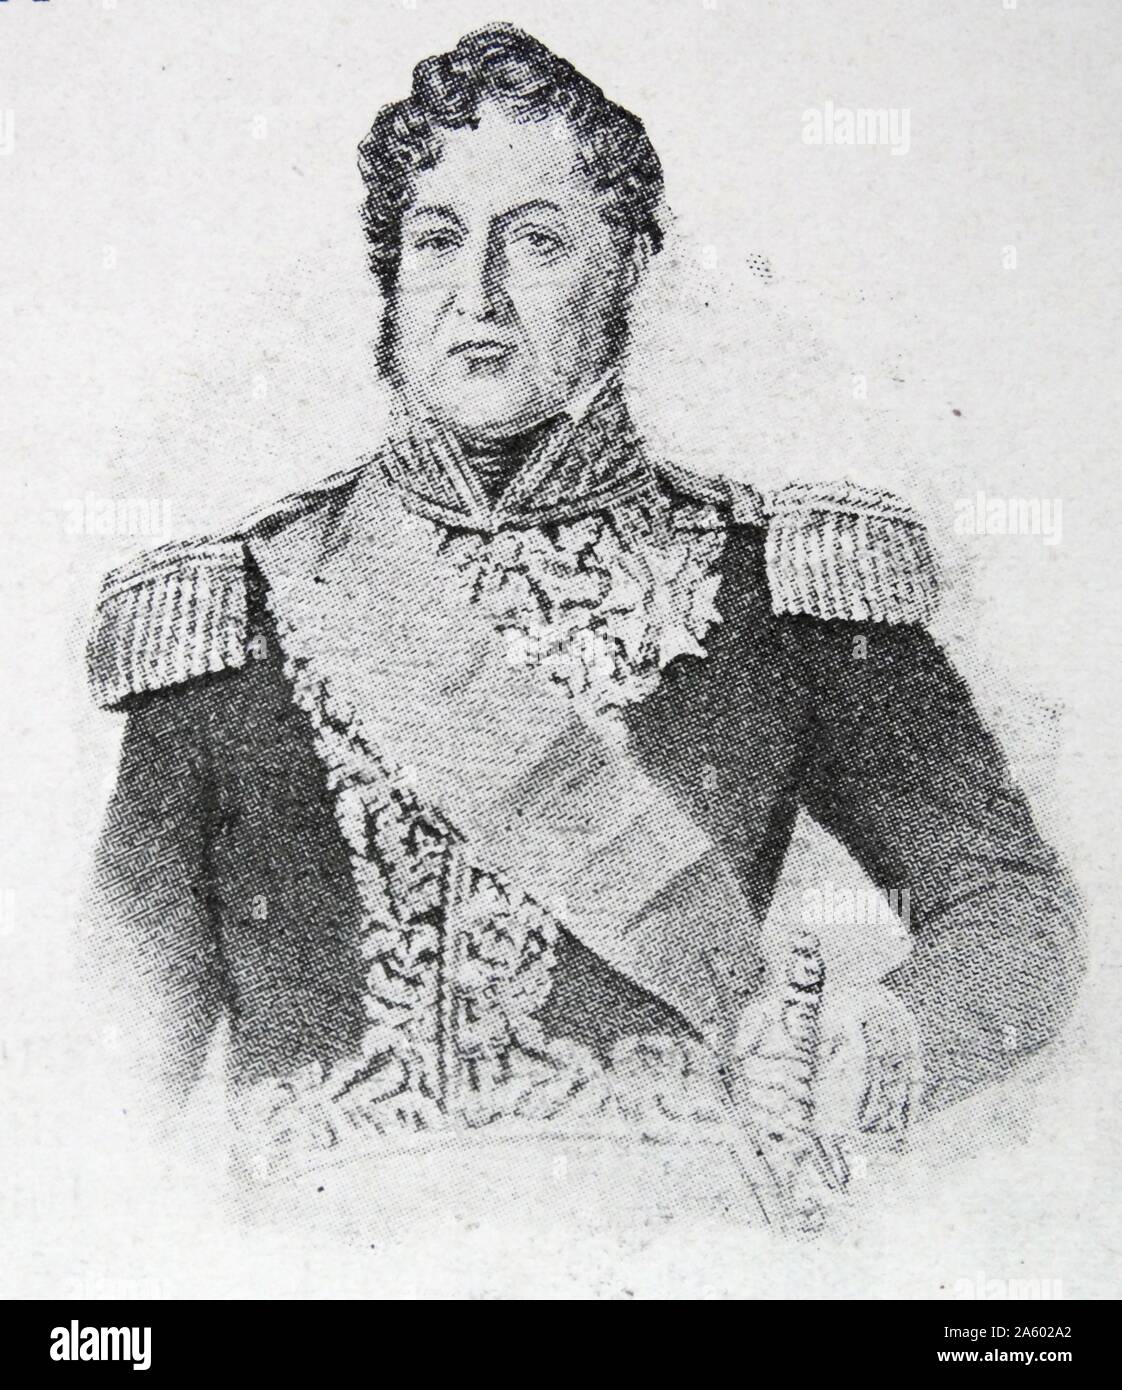 Louis Philippe, King of France. After the Revolution of 1830, Philippe received the crown and under the 'citizen king', France regained some of her prosperity. Stock Photo